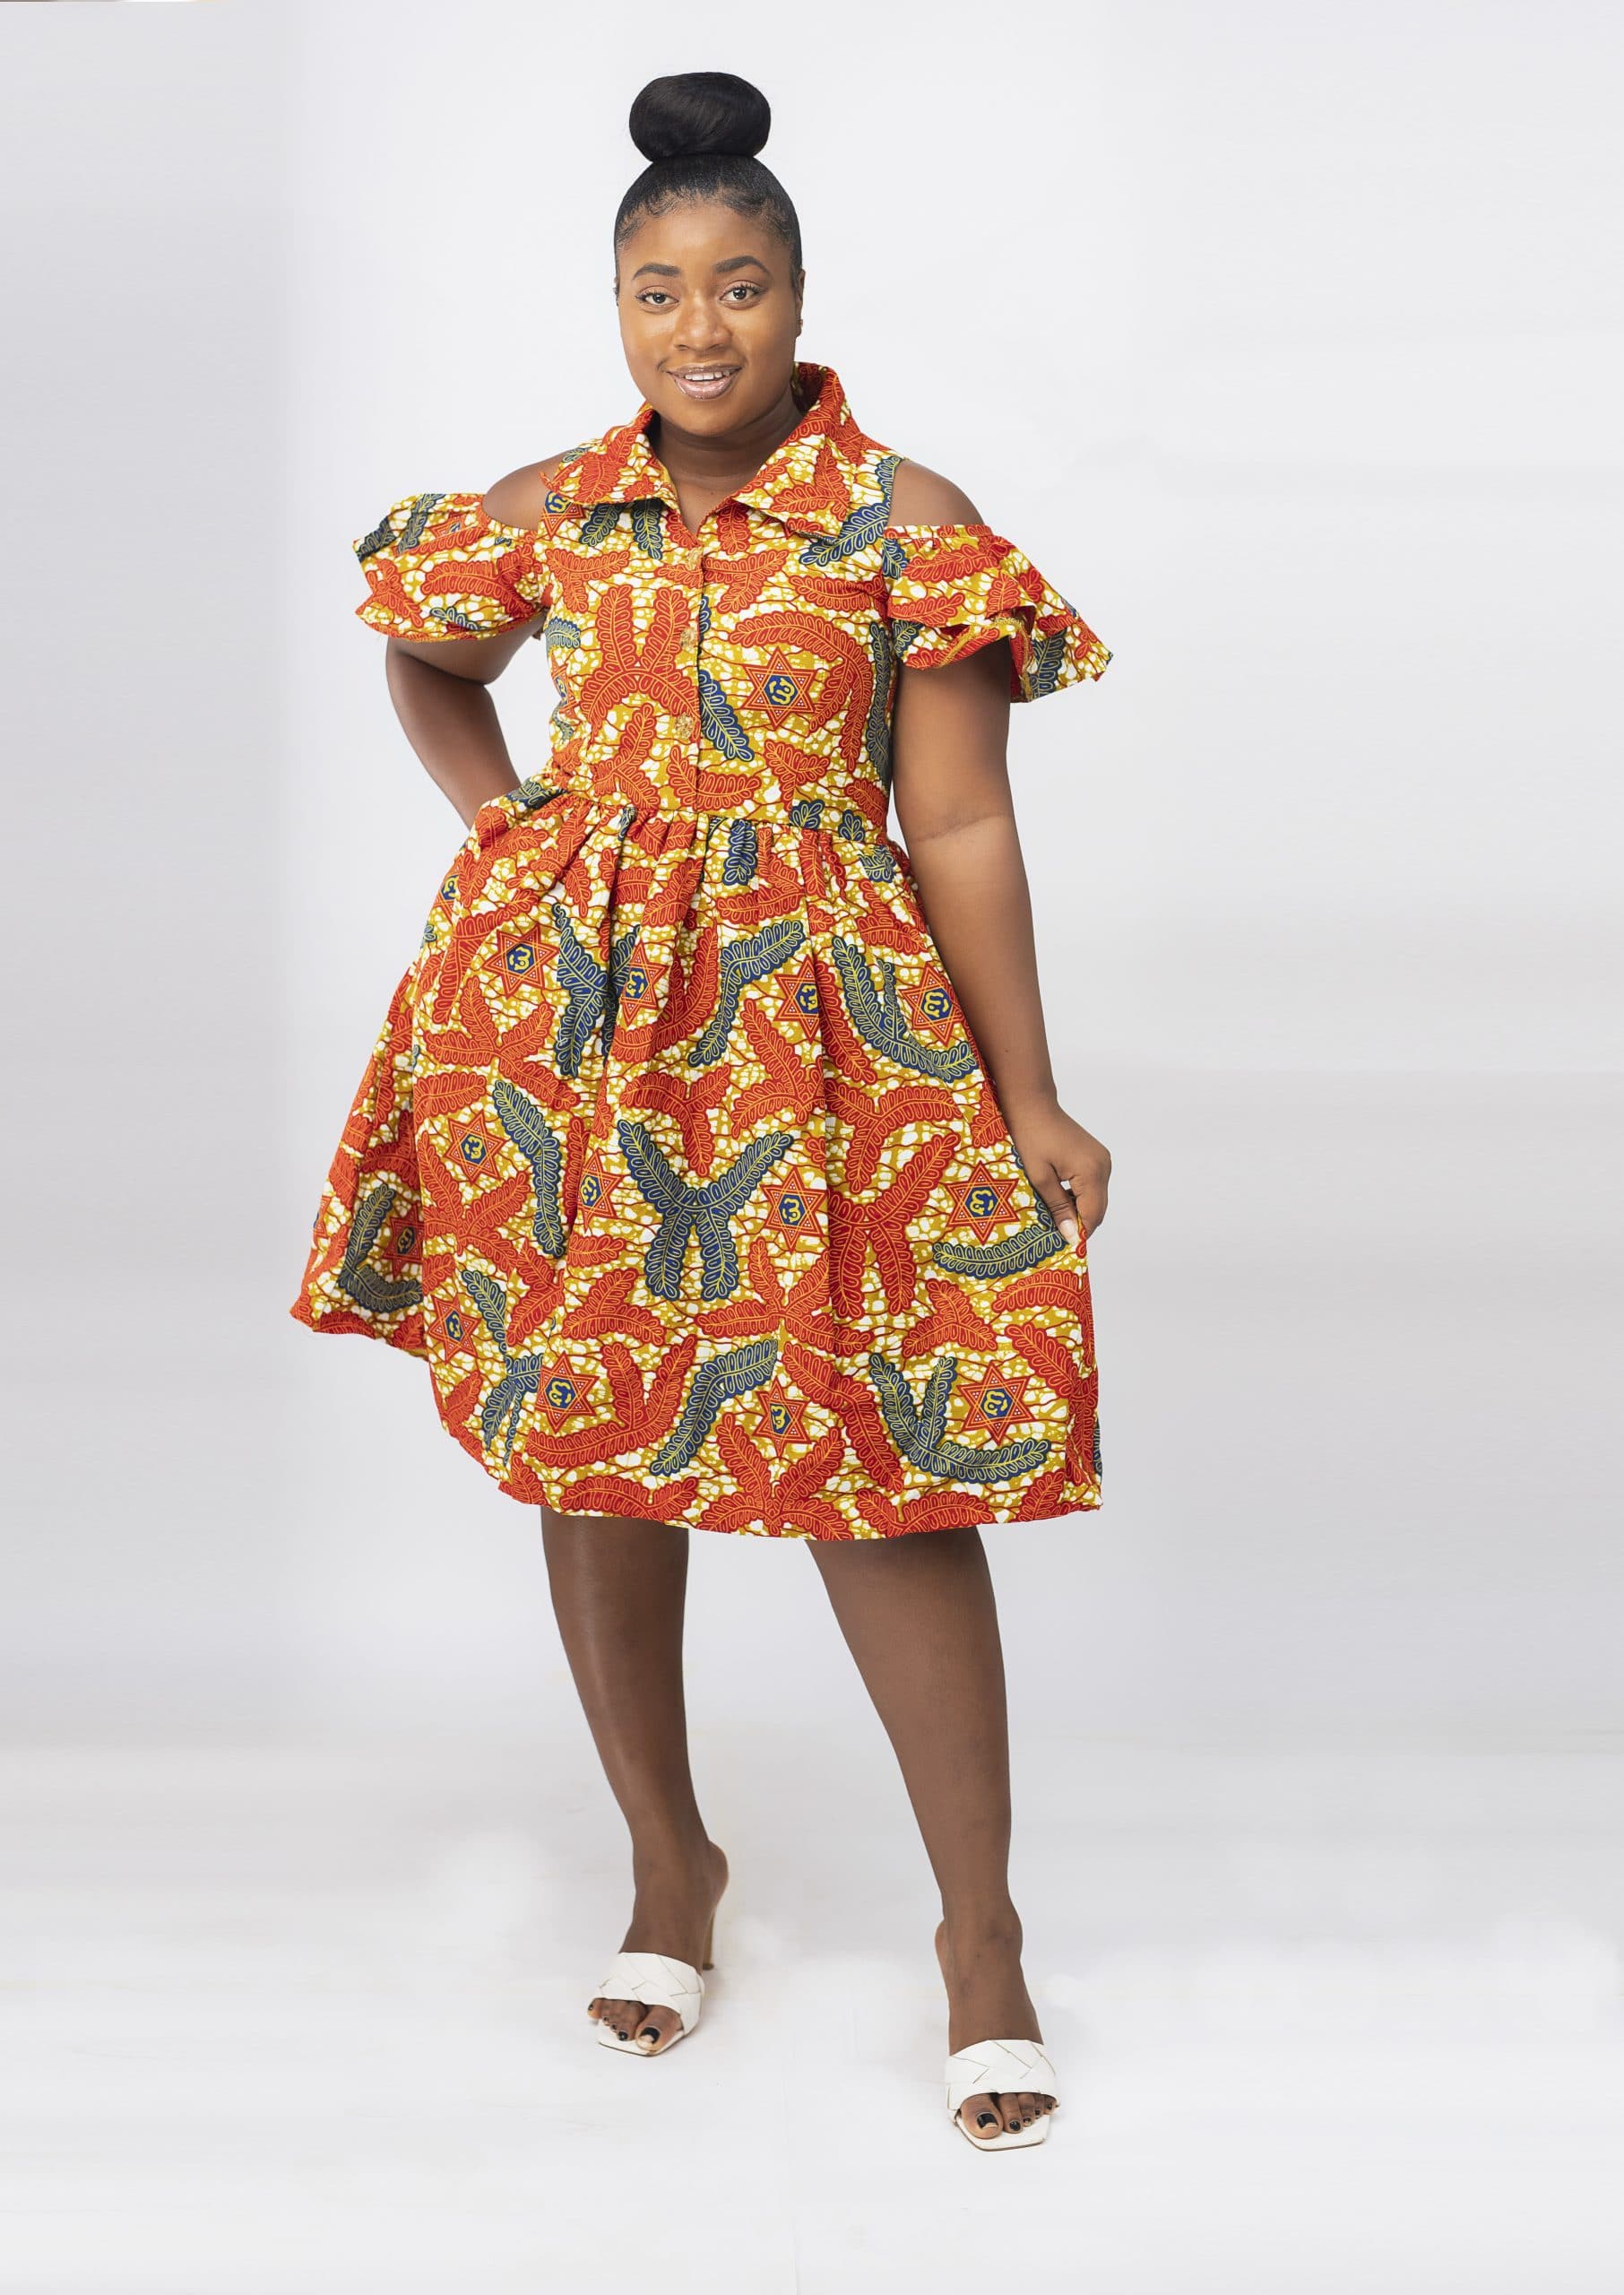 Frontal of model wearing our Oluchi skater midi dress in all over orange, gold and blue African print pattern. Features a cold shoulder, short sleeve, collar neckline.